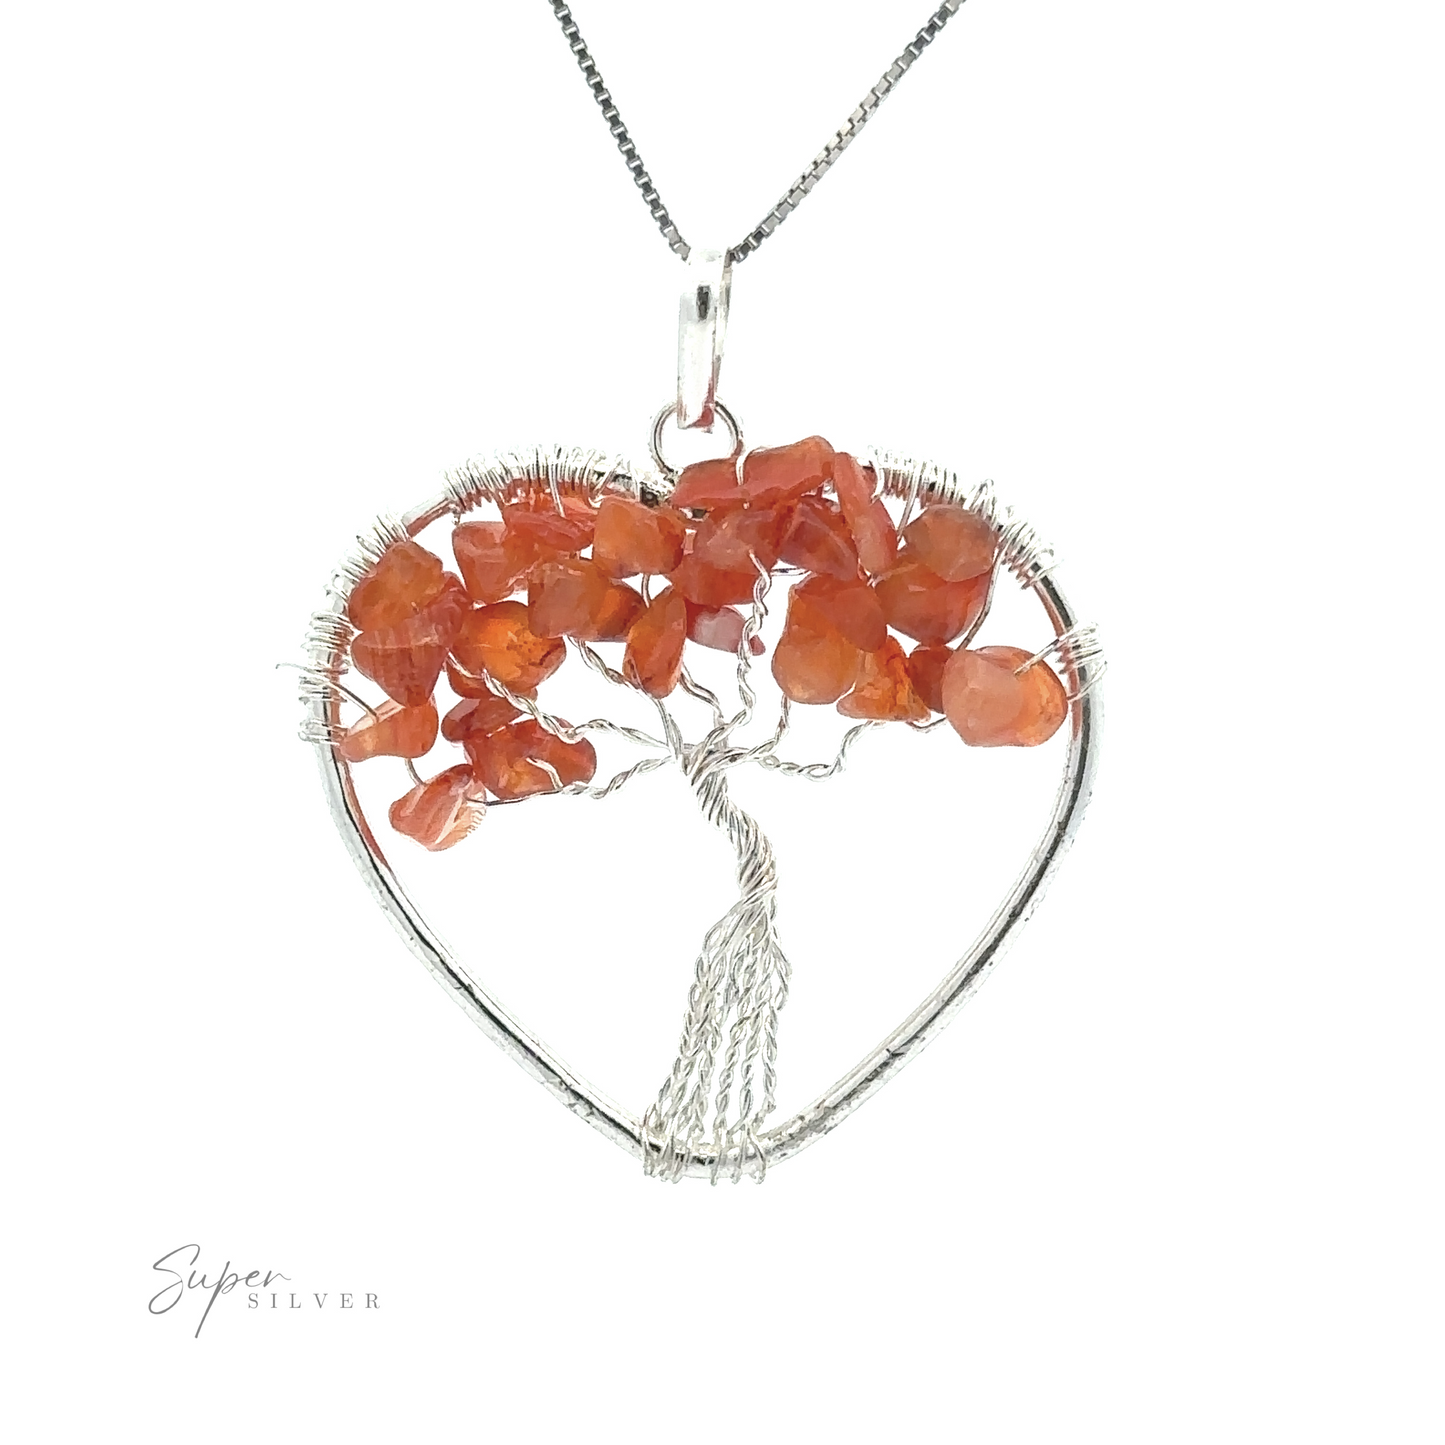 
                  
                    A Heart Shaped Tree of Life Pendant, crafted with silver wire and adorned with orange gemstones, dangles elegantly from a silver necklace chain. The words "Super Silver" appear in the lower left corner, adding a touch of sophistication.
                  
                